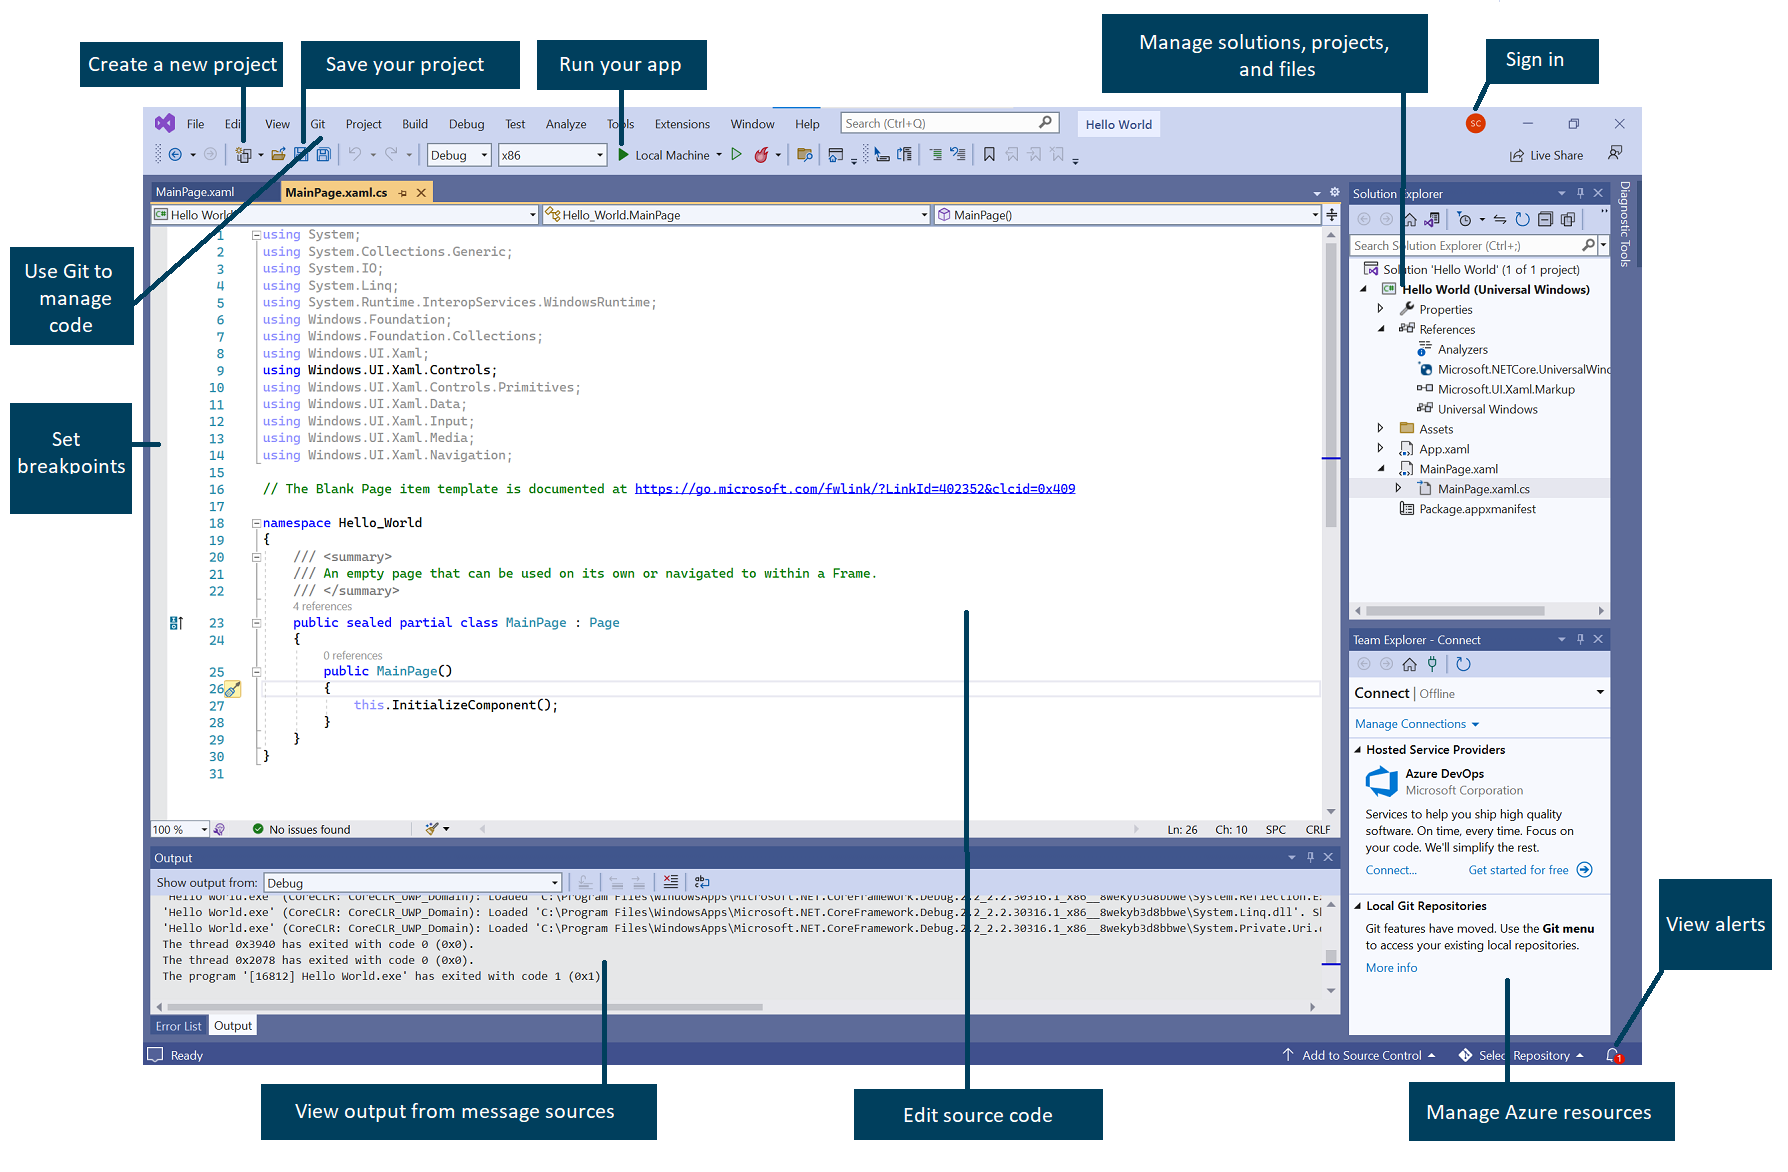 Screenshot of the Visual Studio user-interface in editor view. The main features are labeled.